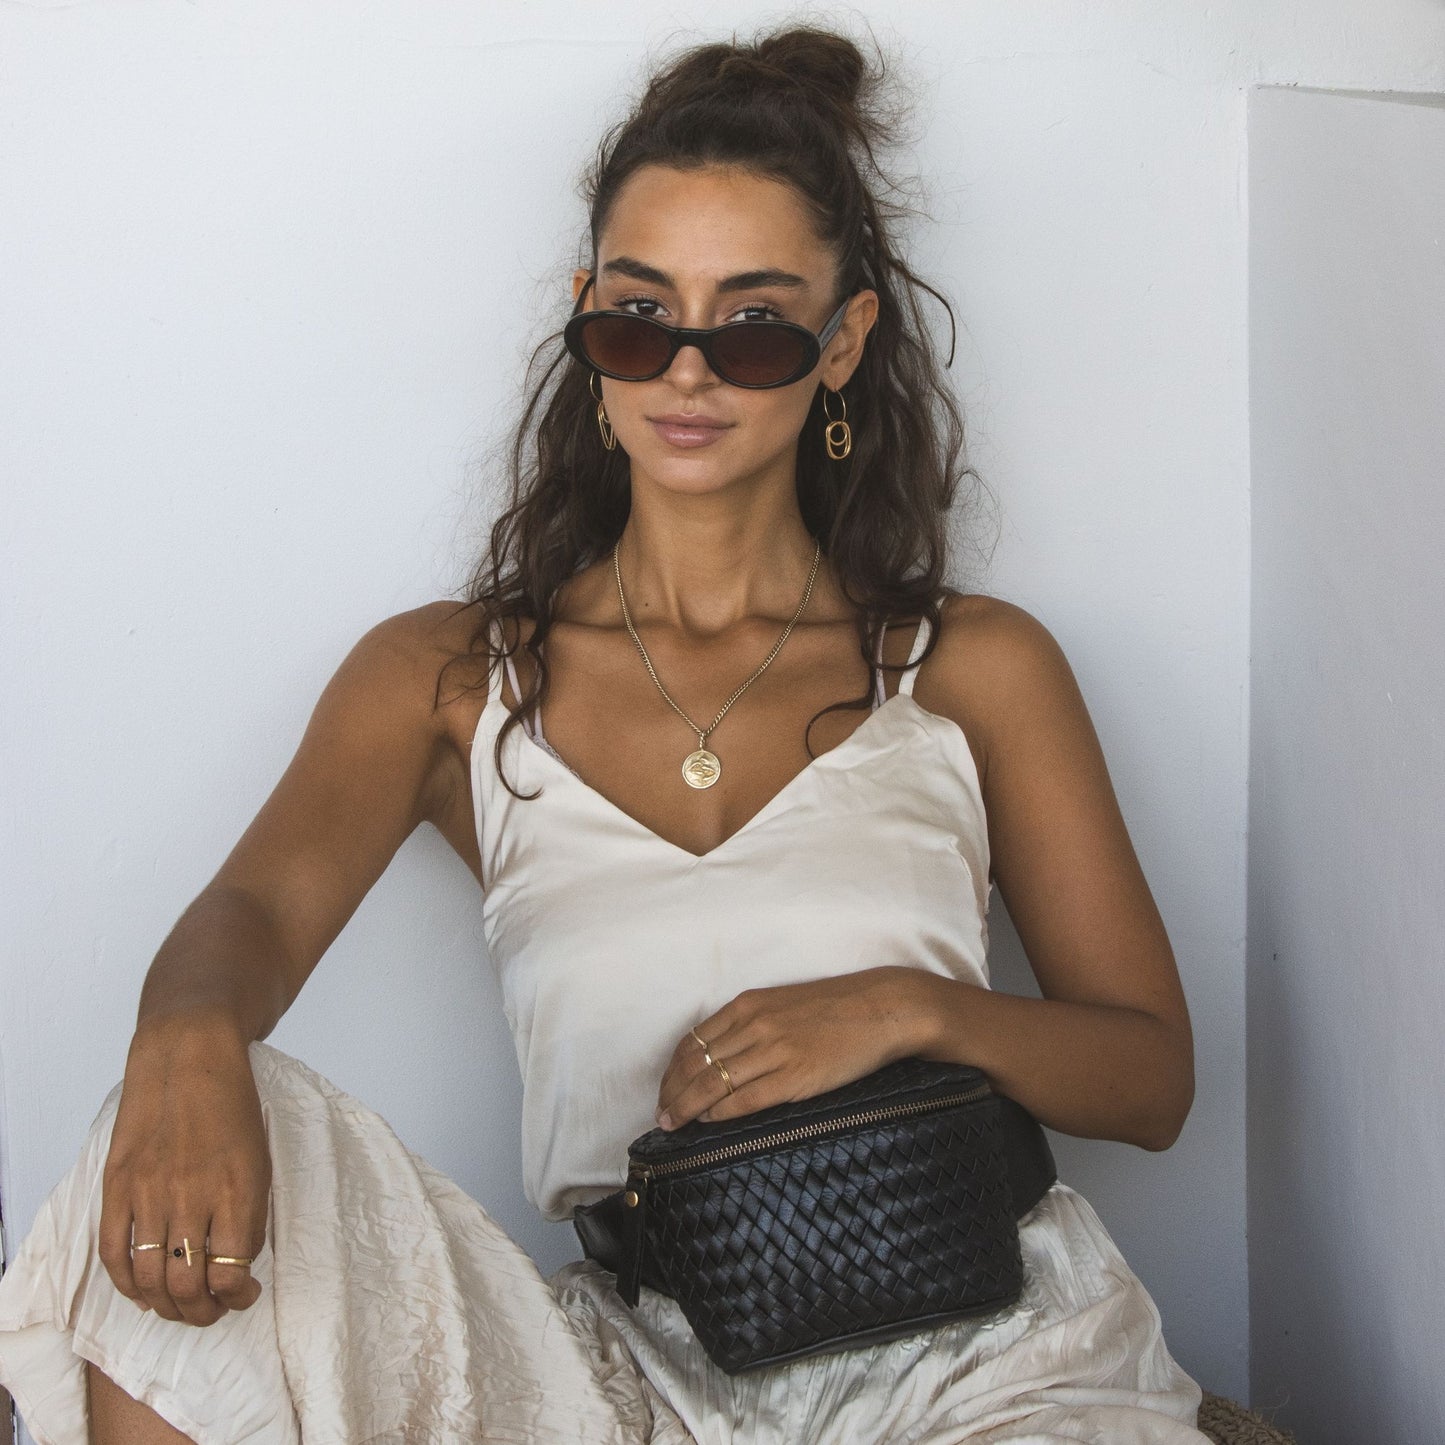 woven remy fanny pack - black